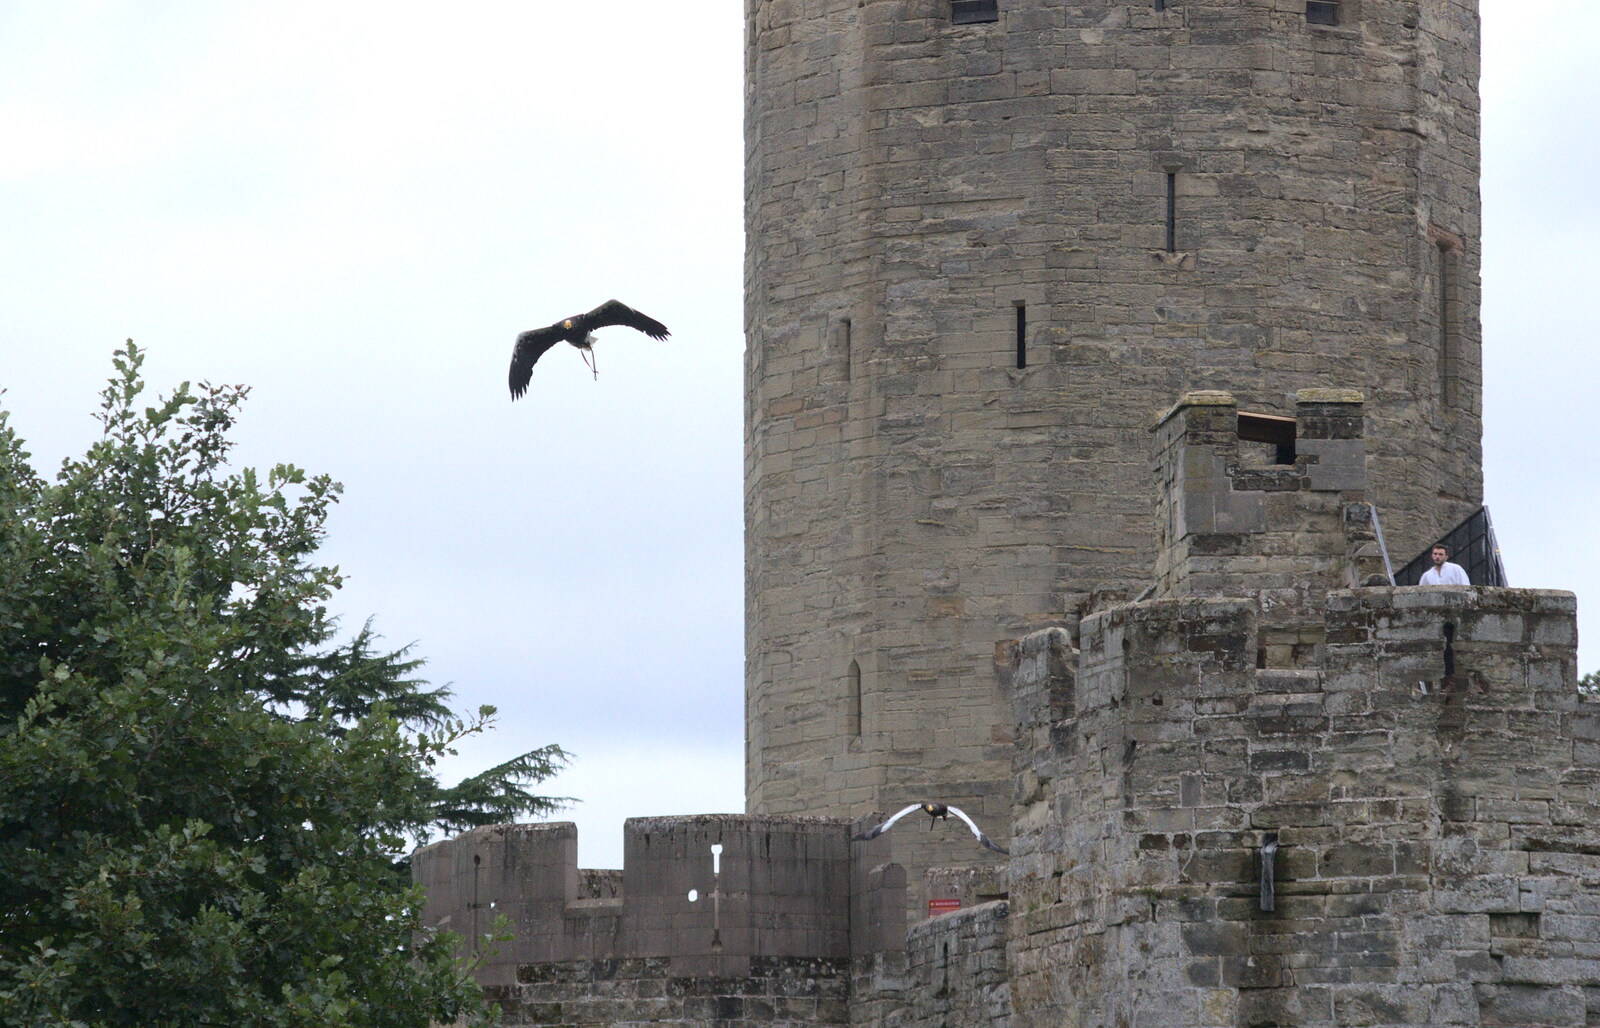 The eagle flies from the castle tower from A Day at Warwick Castle, Warwickshire - 8th September 2018